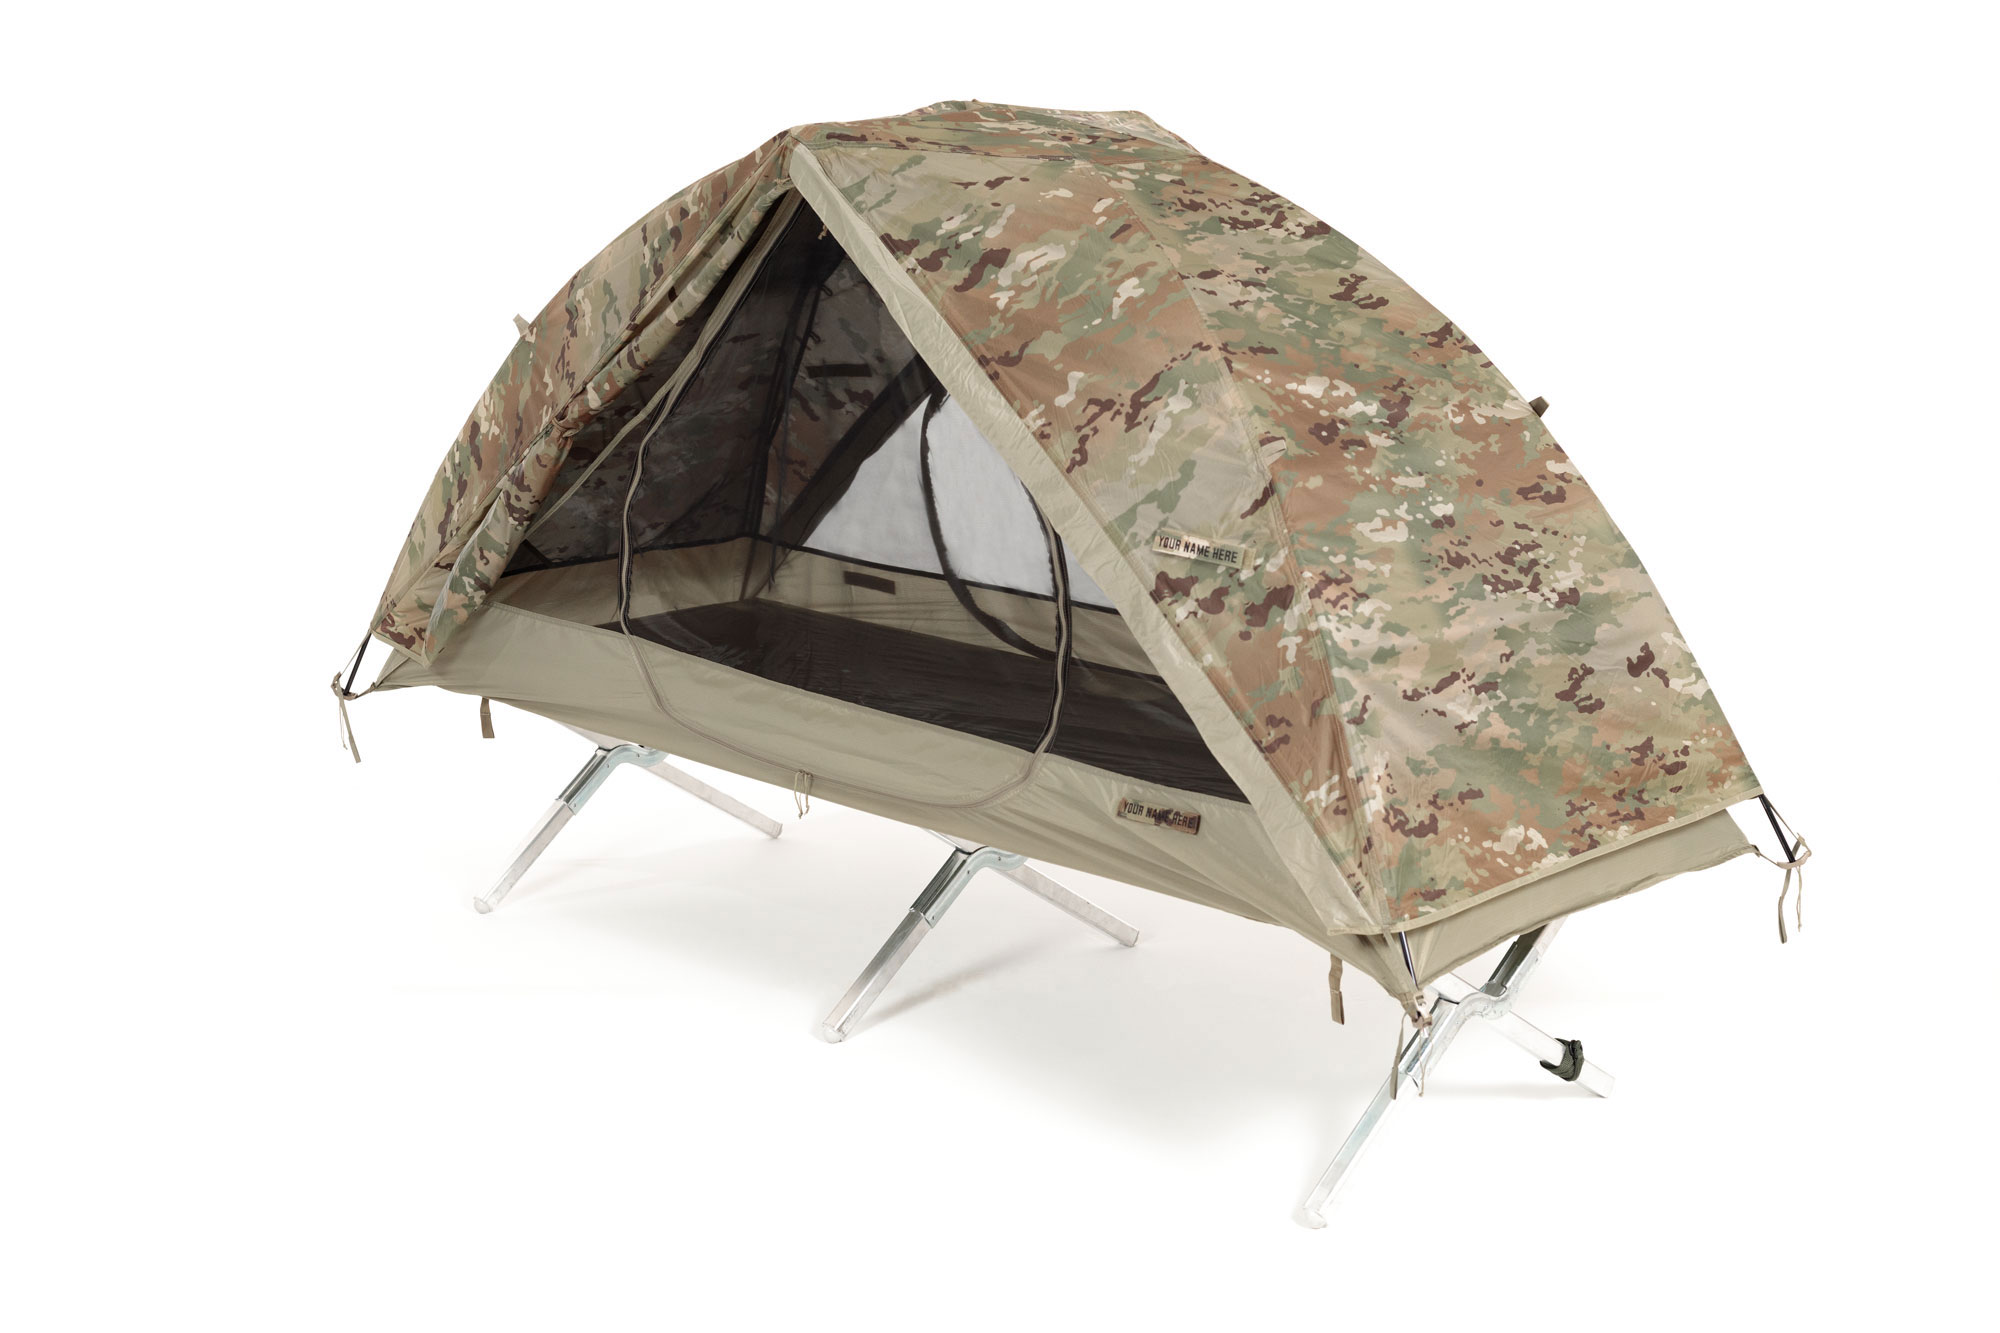 Army Tent Cot - Army Military